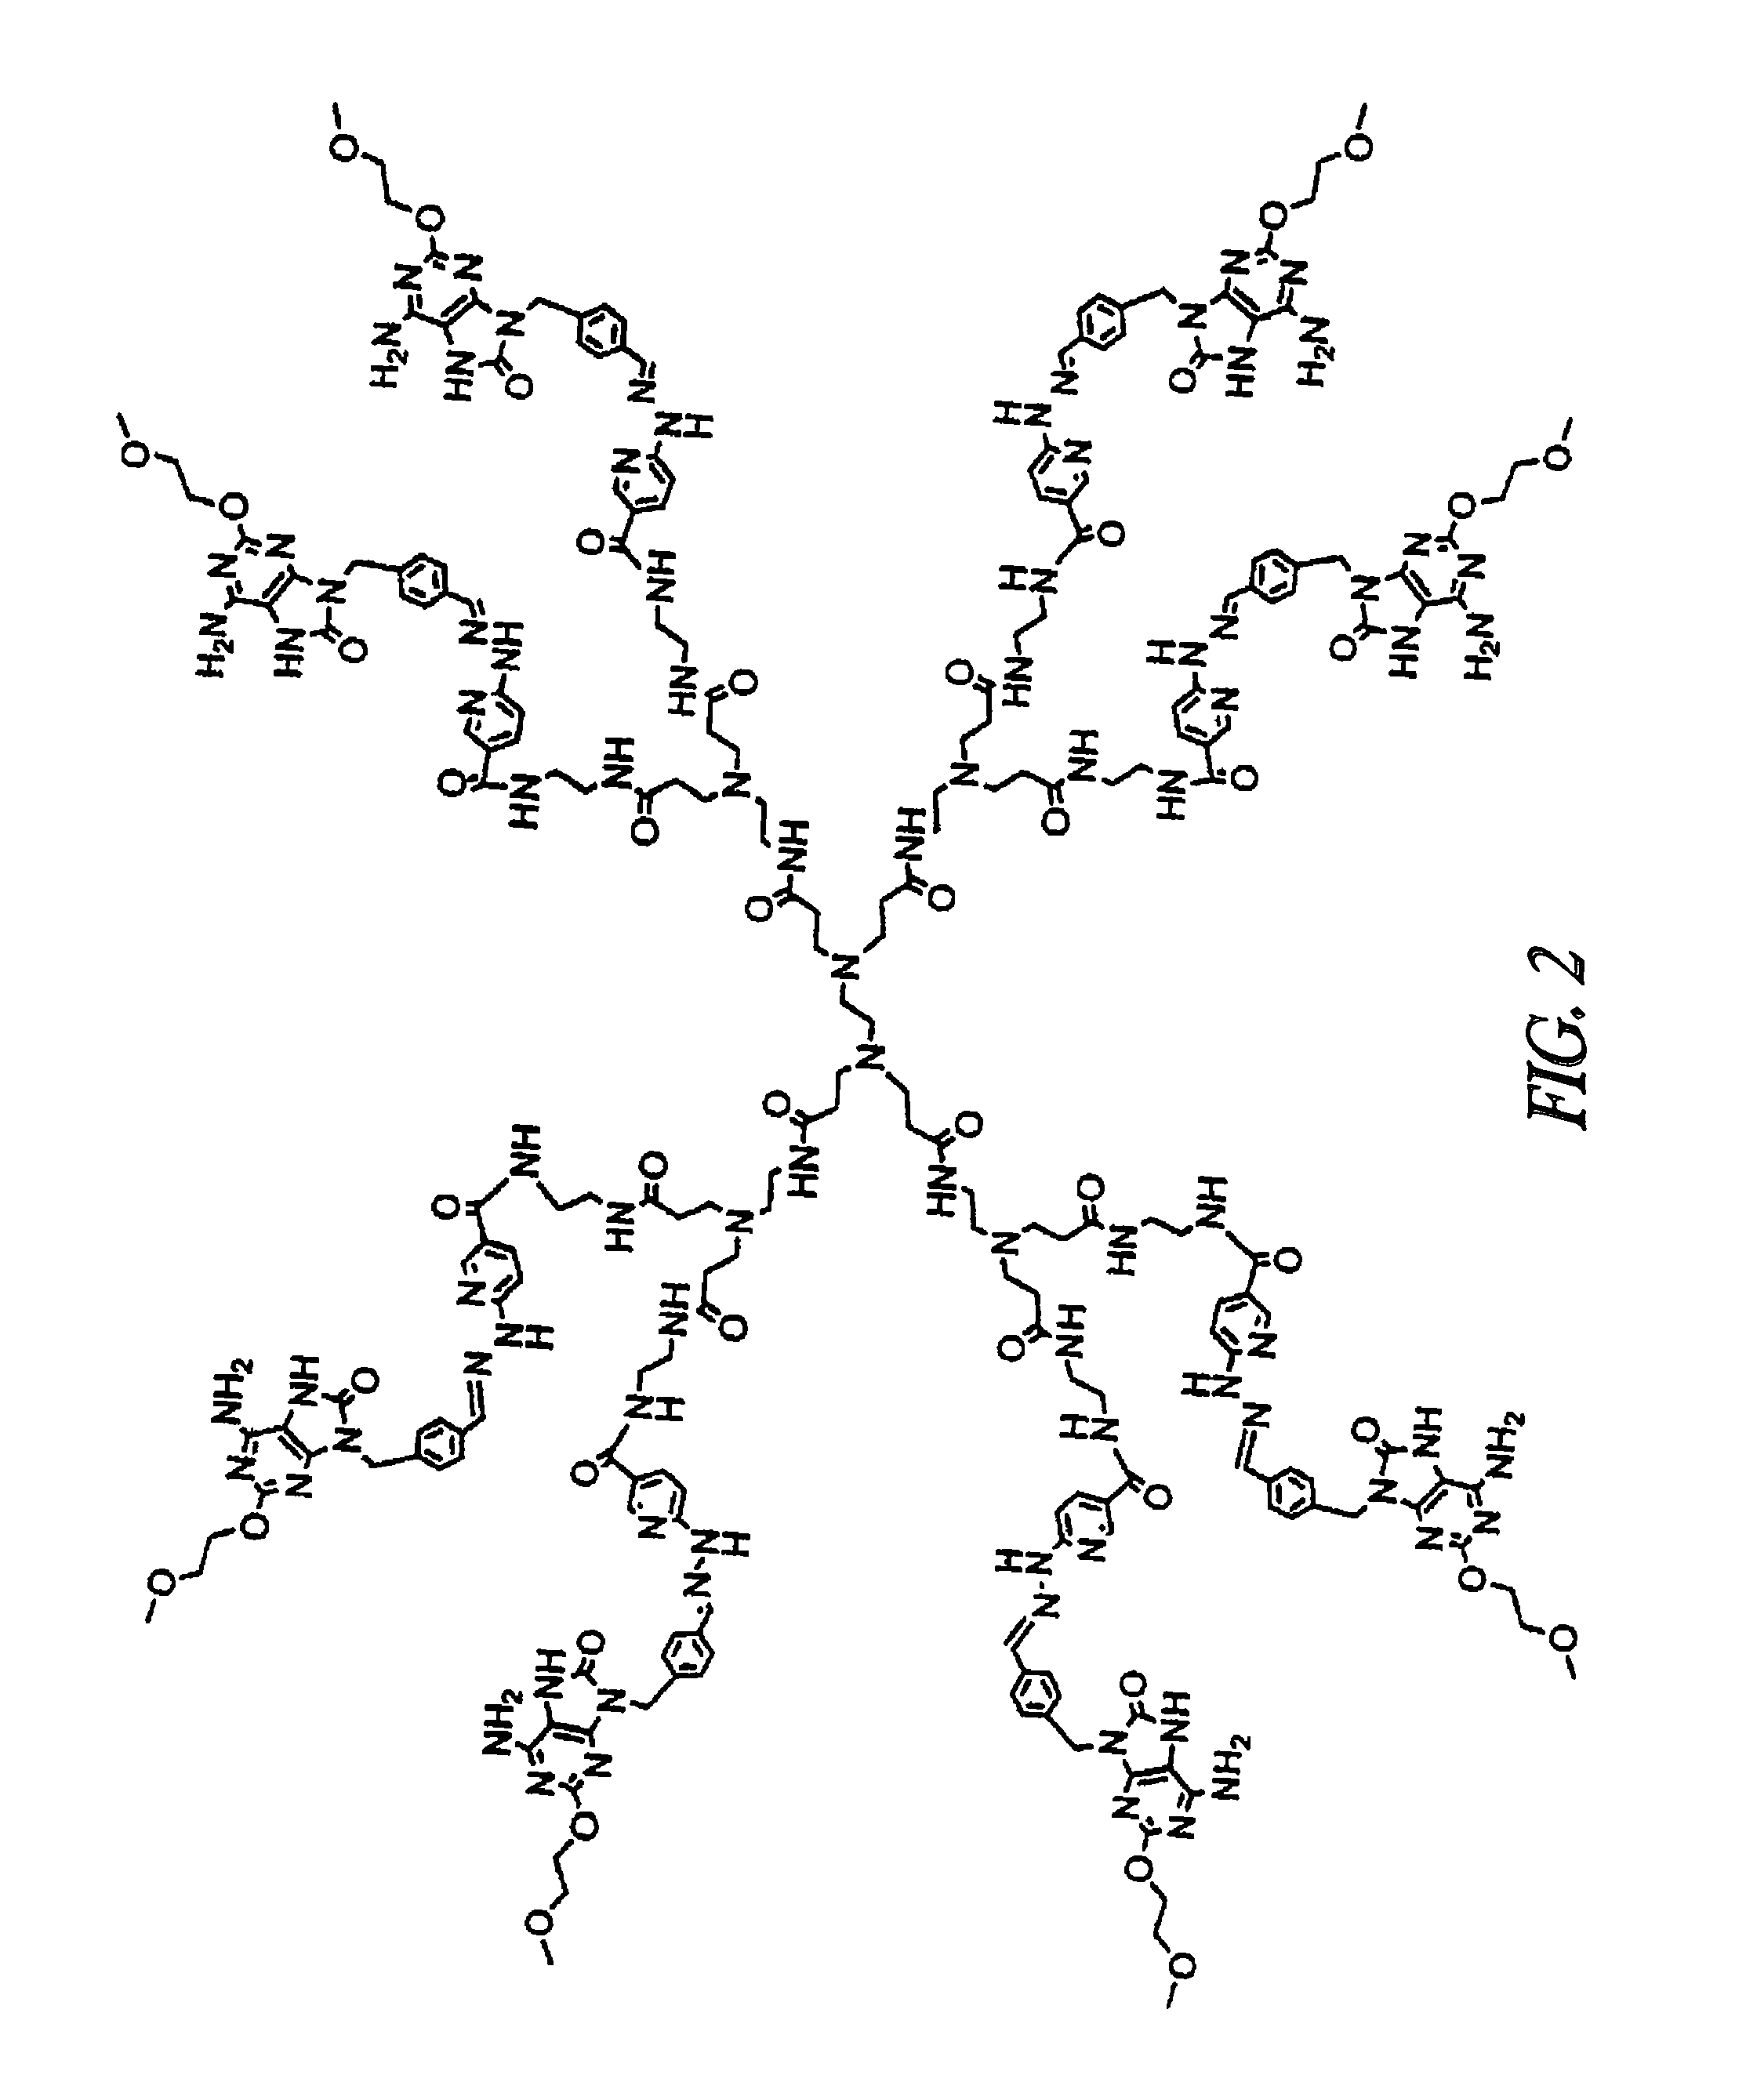 Conjugates of synthetic TLR agonists and uses therefor